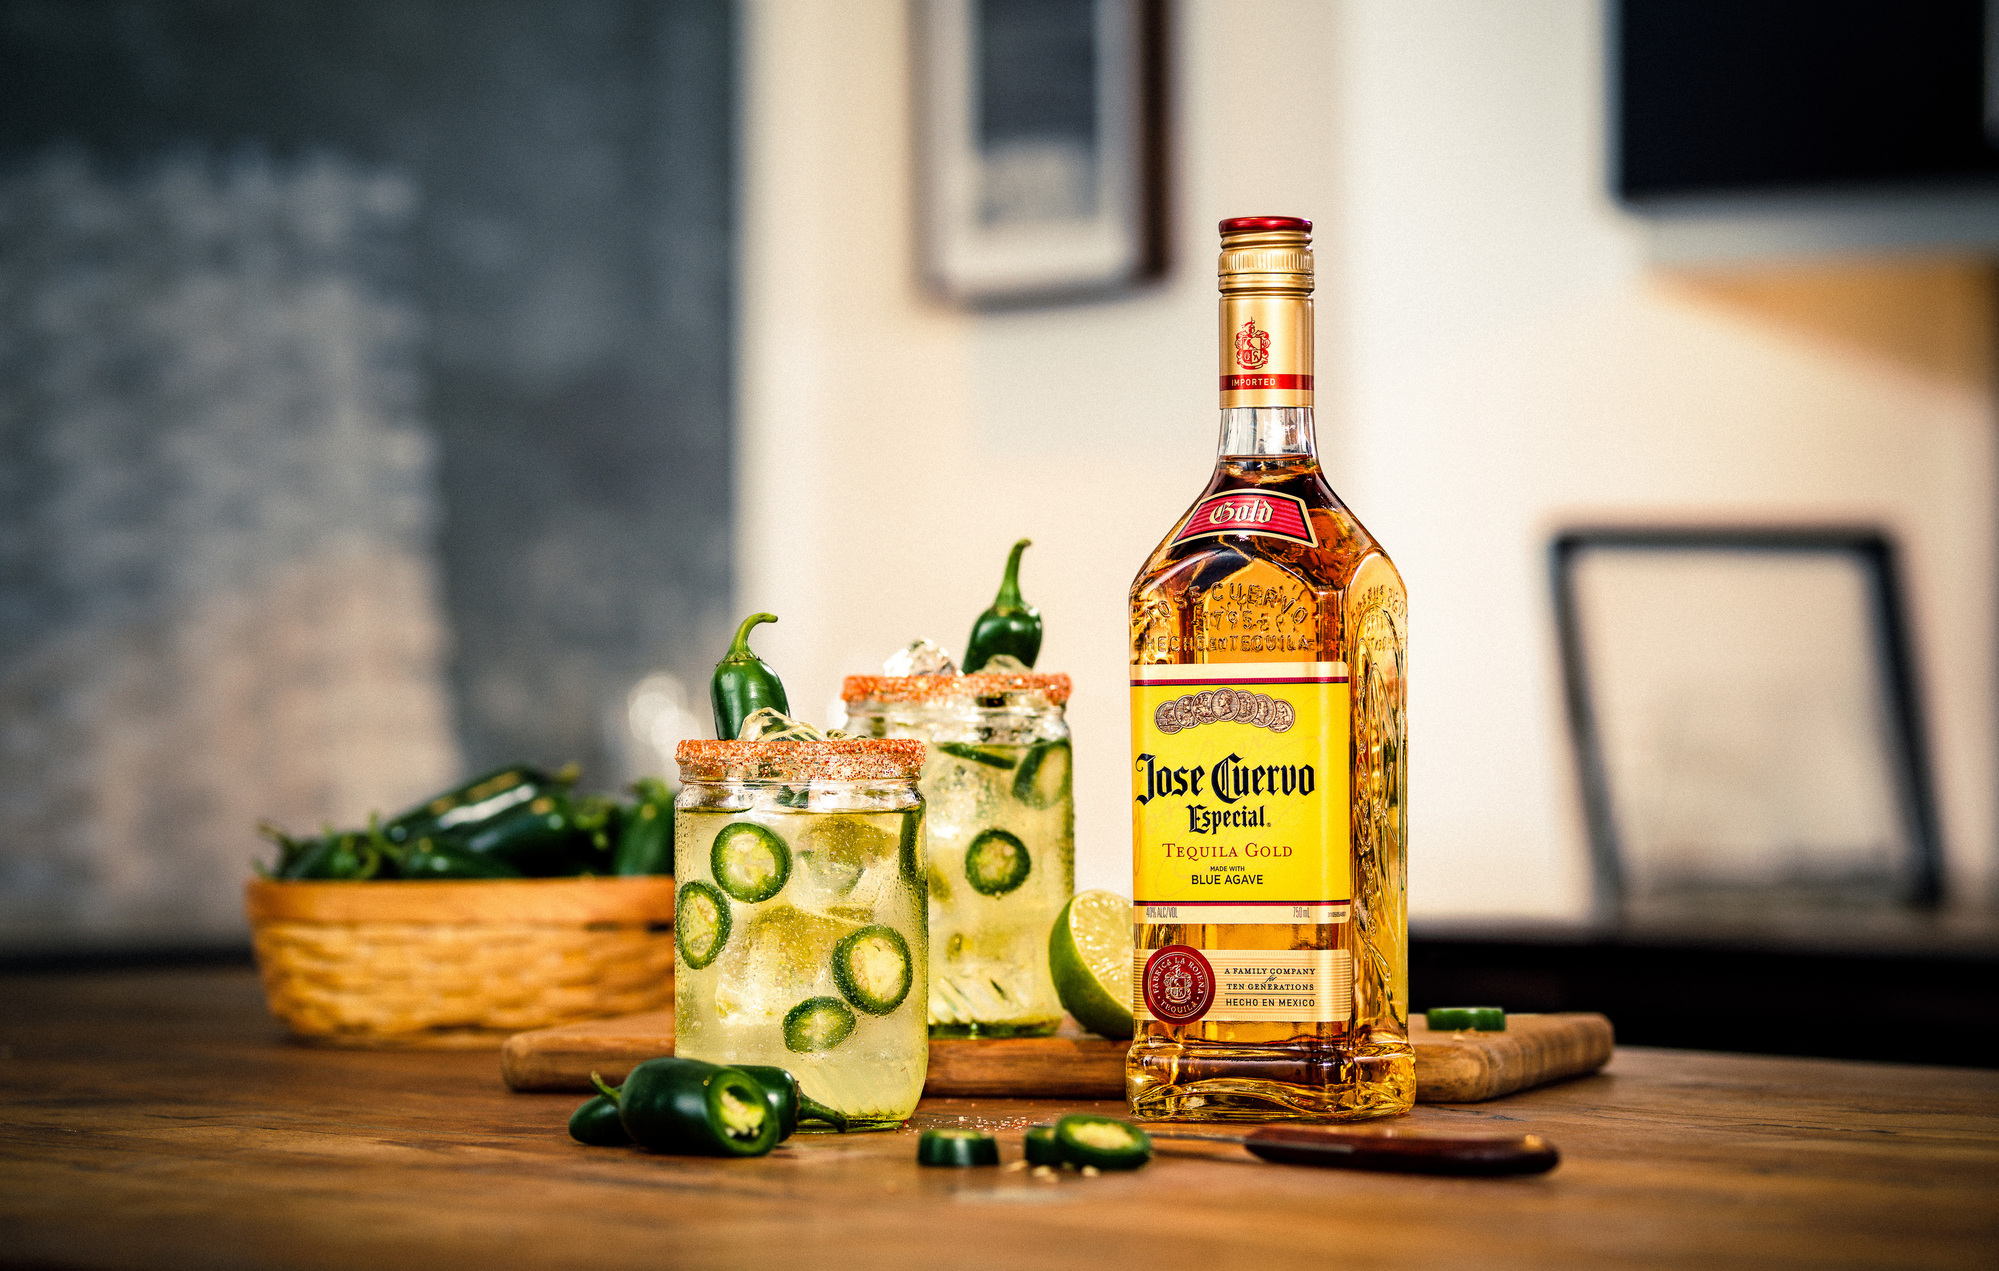 Jose Cuervo tequila bottle and cocktails by beverage photographer Timothy Hogan. 

Beverages and alcohol product & advertising photography by Timothy Hogan Studio in Los Angeles